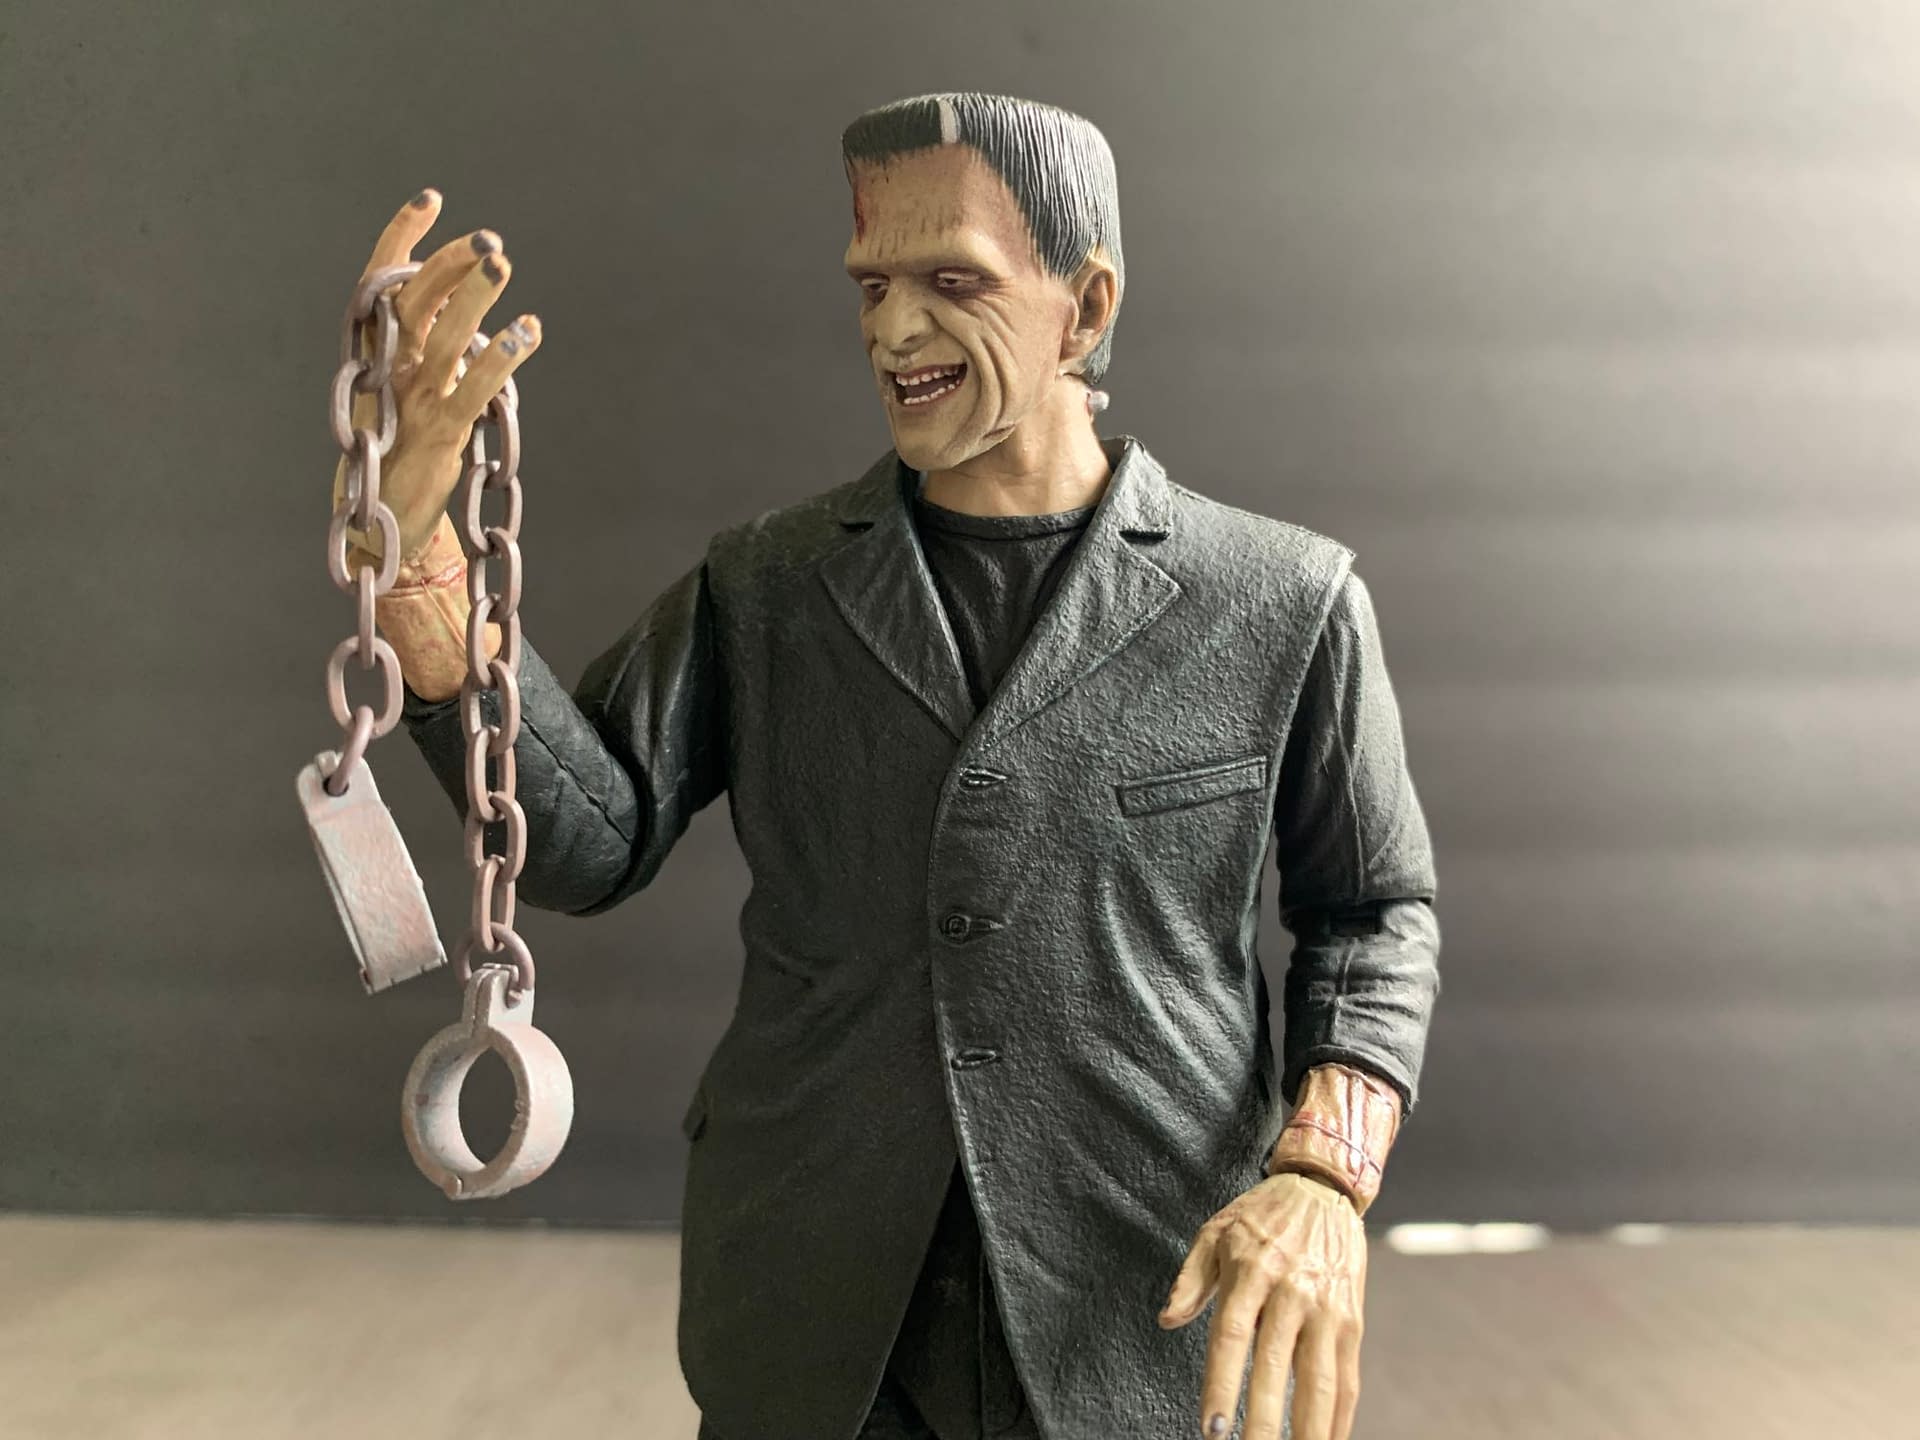 NECA's Universal Monsters Frankenstein Figure May Be Best Of The Year